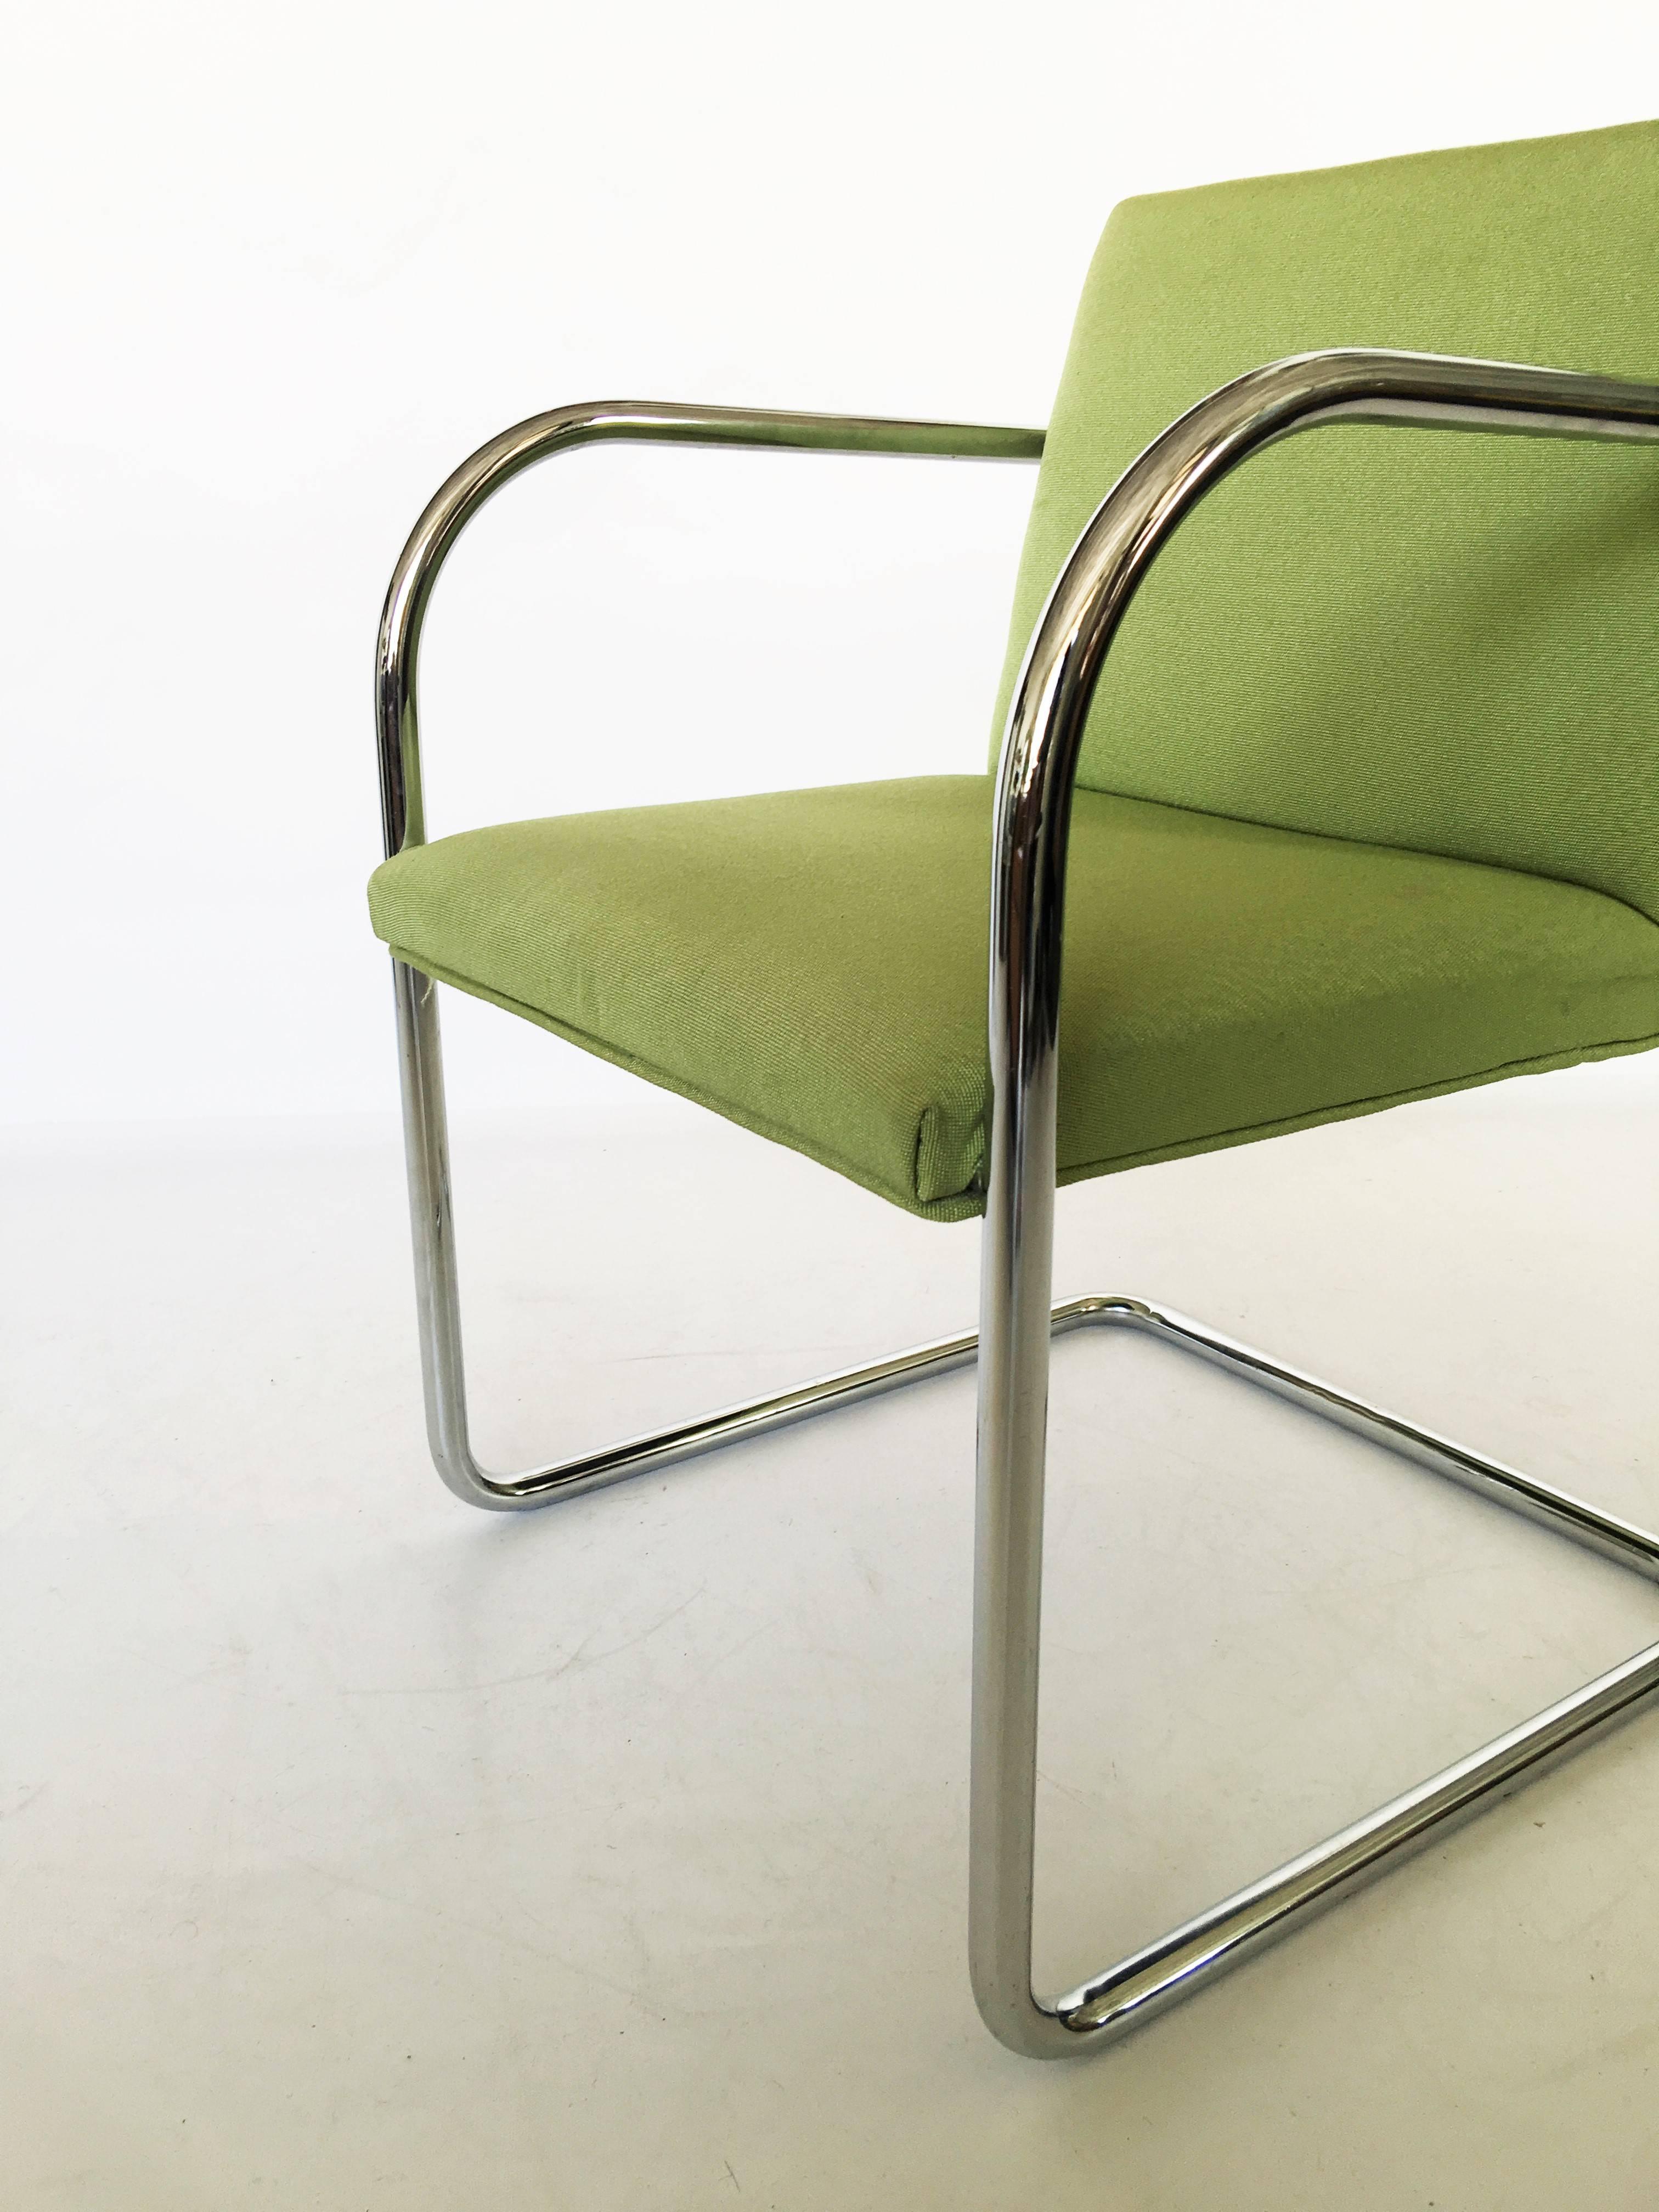 Pair of Brno Chairs in Green In Good Condition For Sale In Dallas, TX